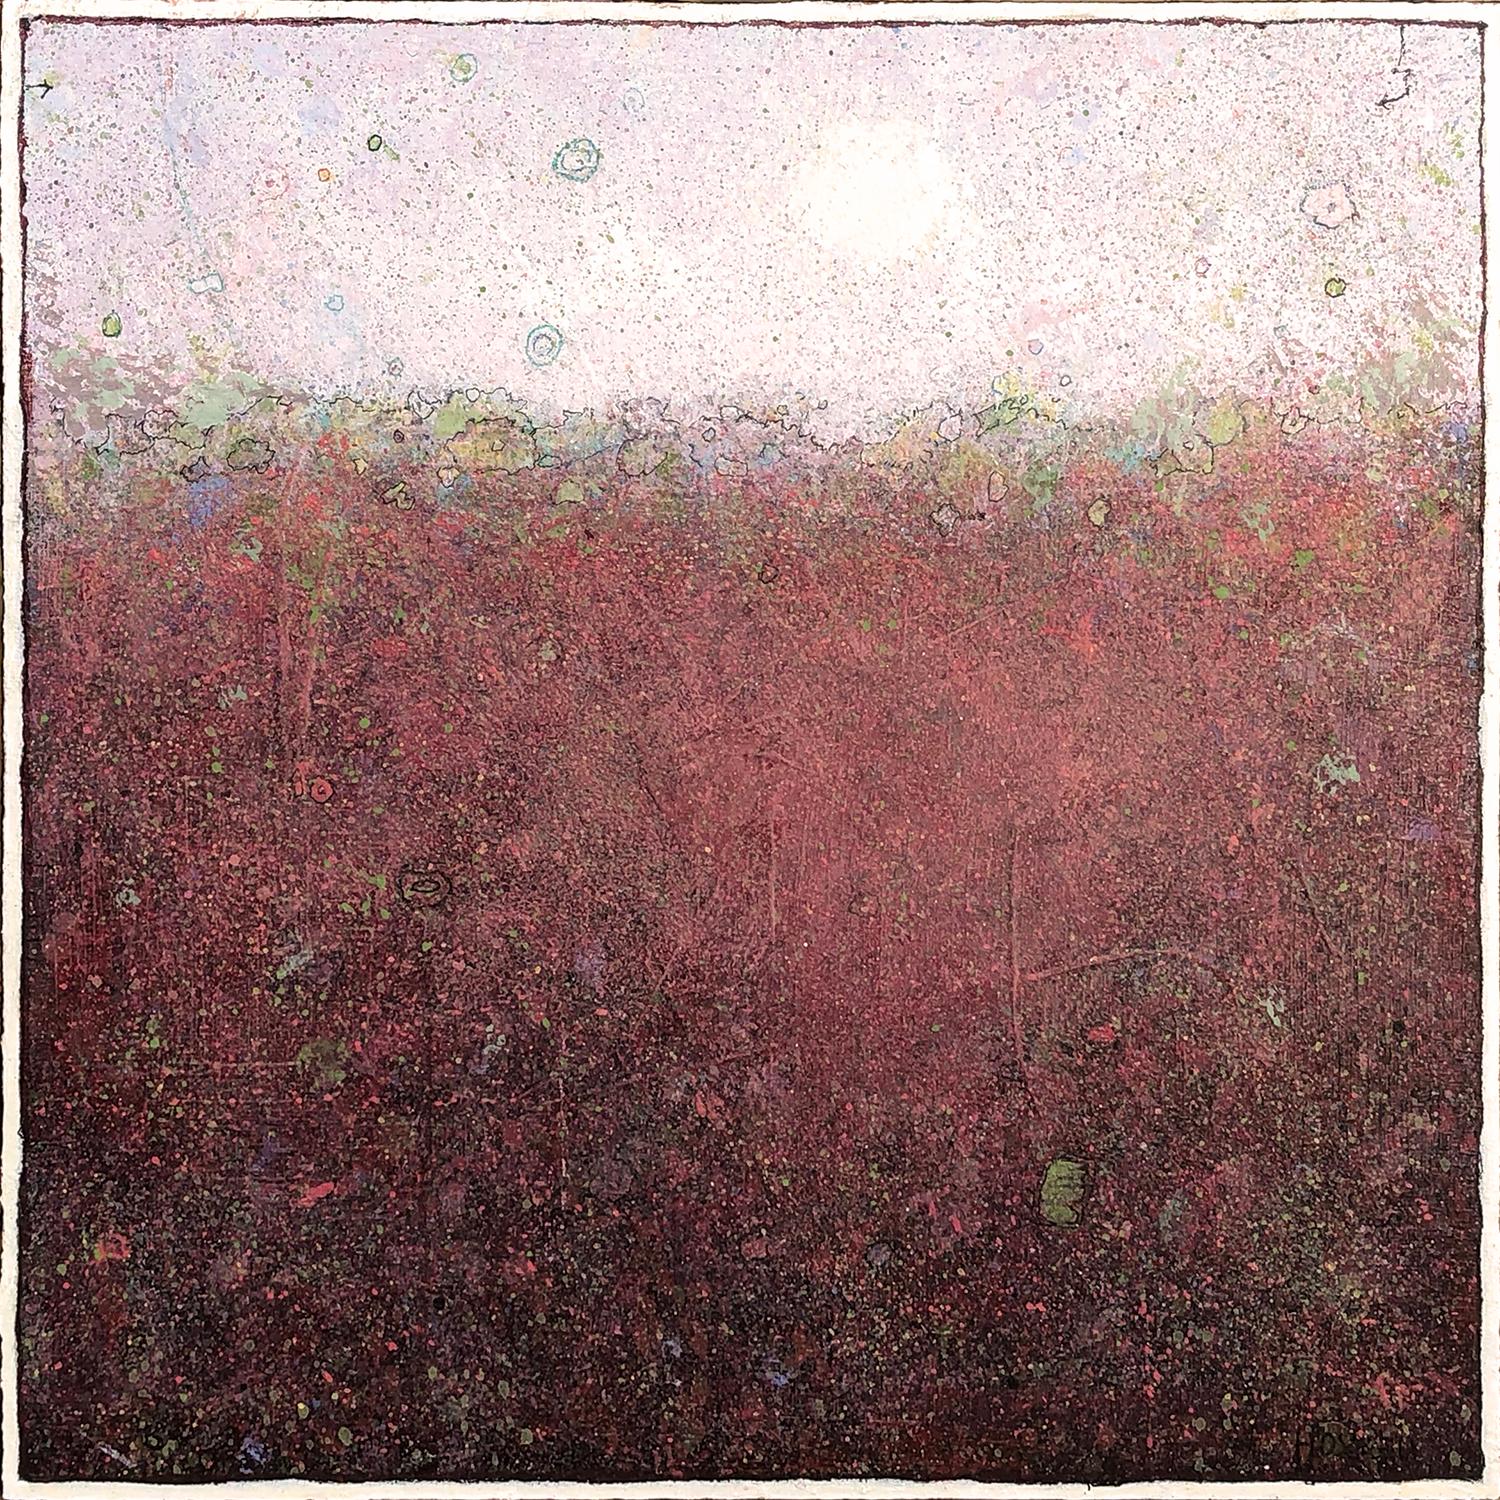 Elwood Howell Landscape Painting - 'Life' transitional acrylic pink and brick red landscape small painting